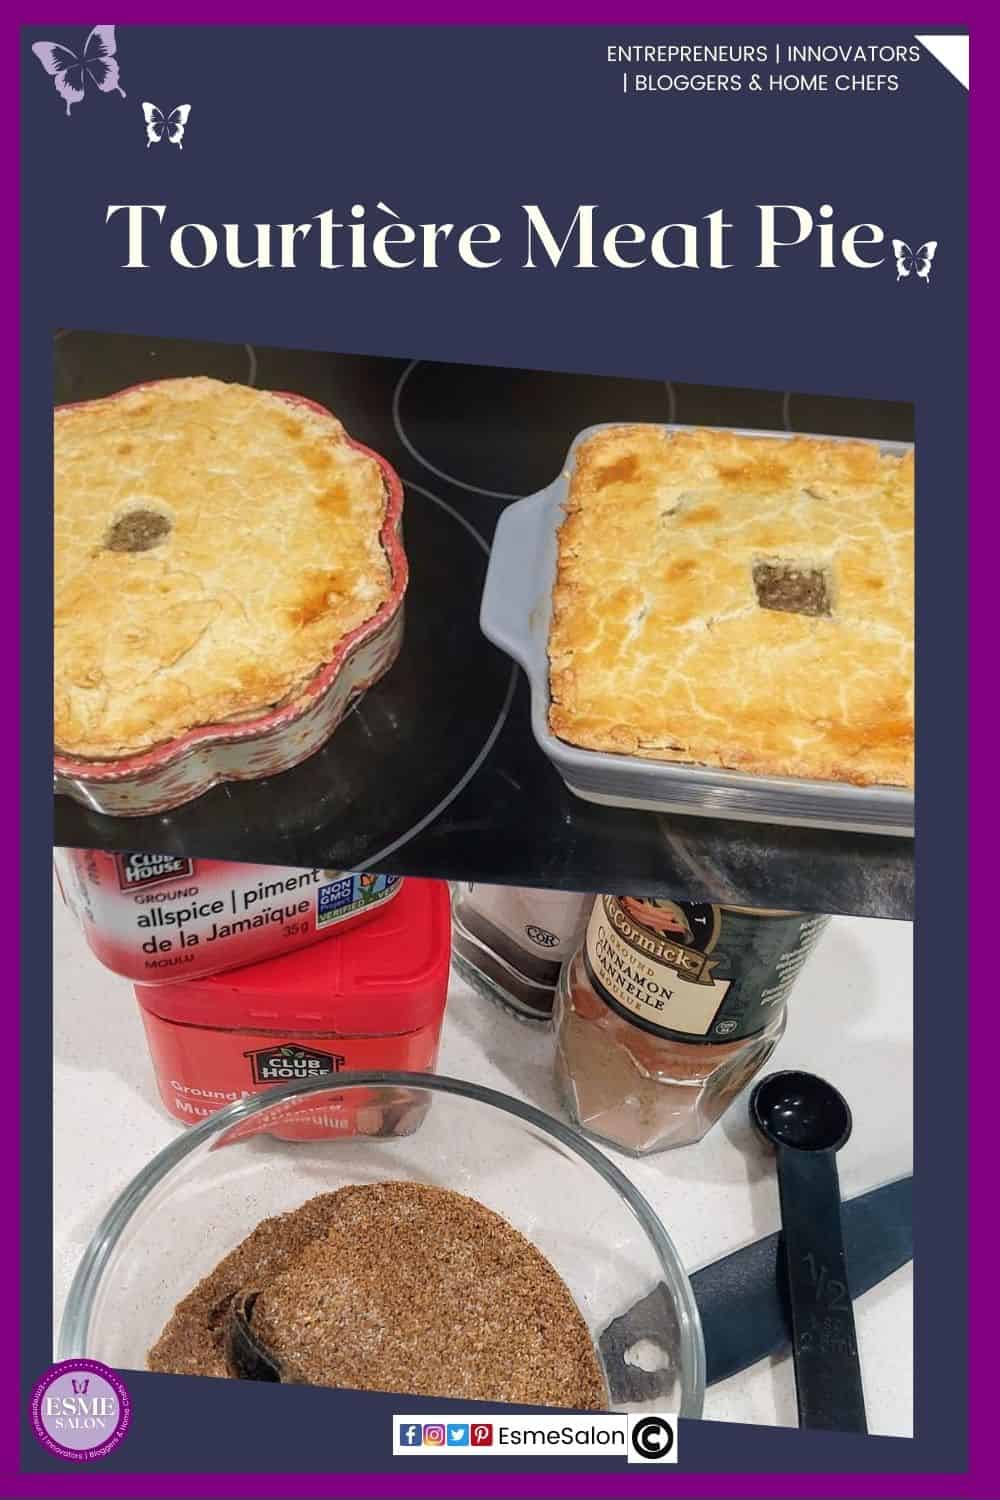 an image of 2 Tourtière Meat Pies, one in a round and one in a square dish and already baked as well as an image of some of the spices used